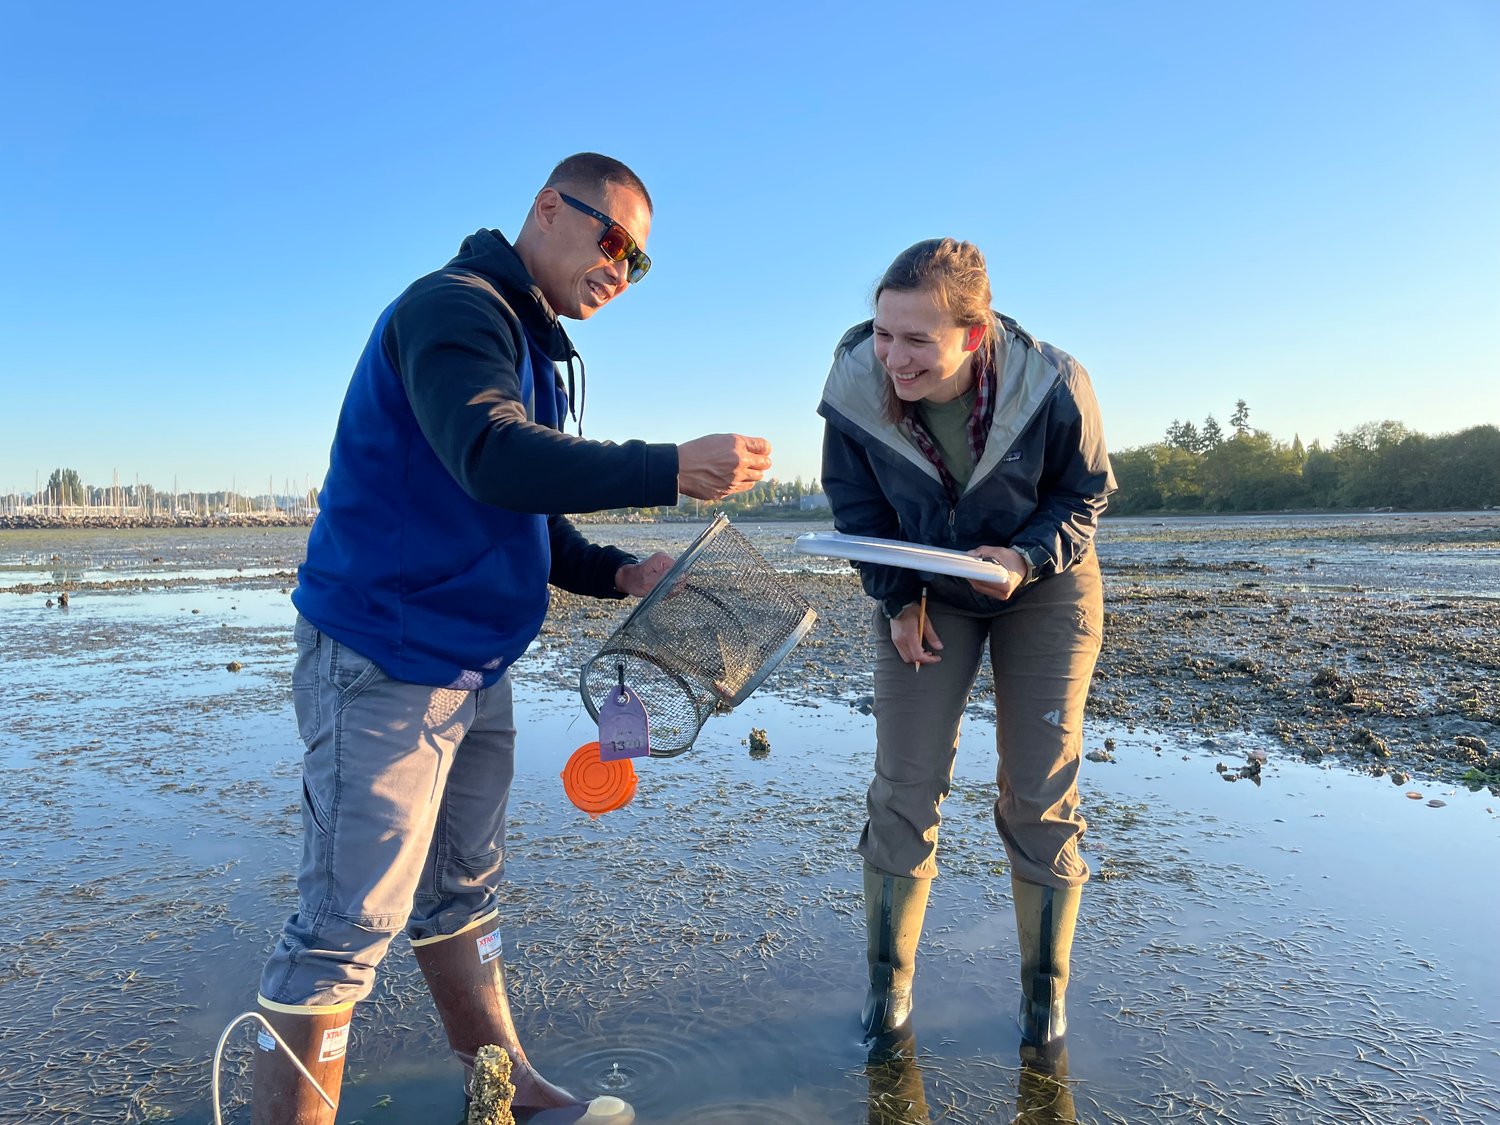 Northwest Straits Commission's Jonathan Hallenbeck, l., and Leah Robison checking a minnow trap in Drayton Harbor.